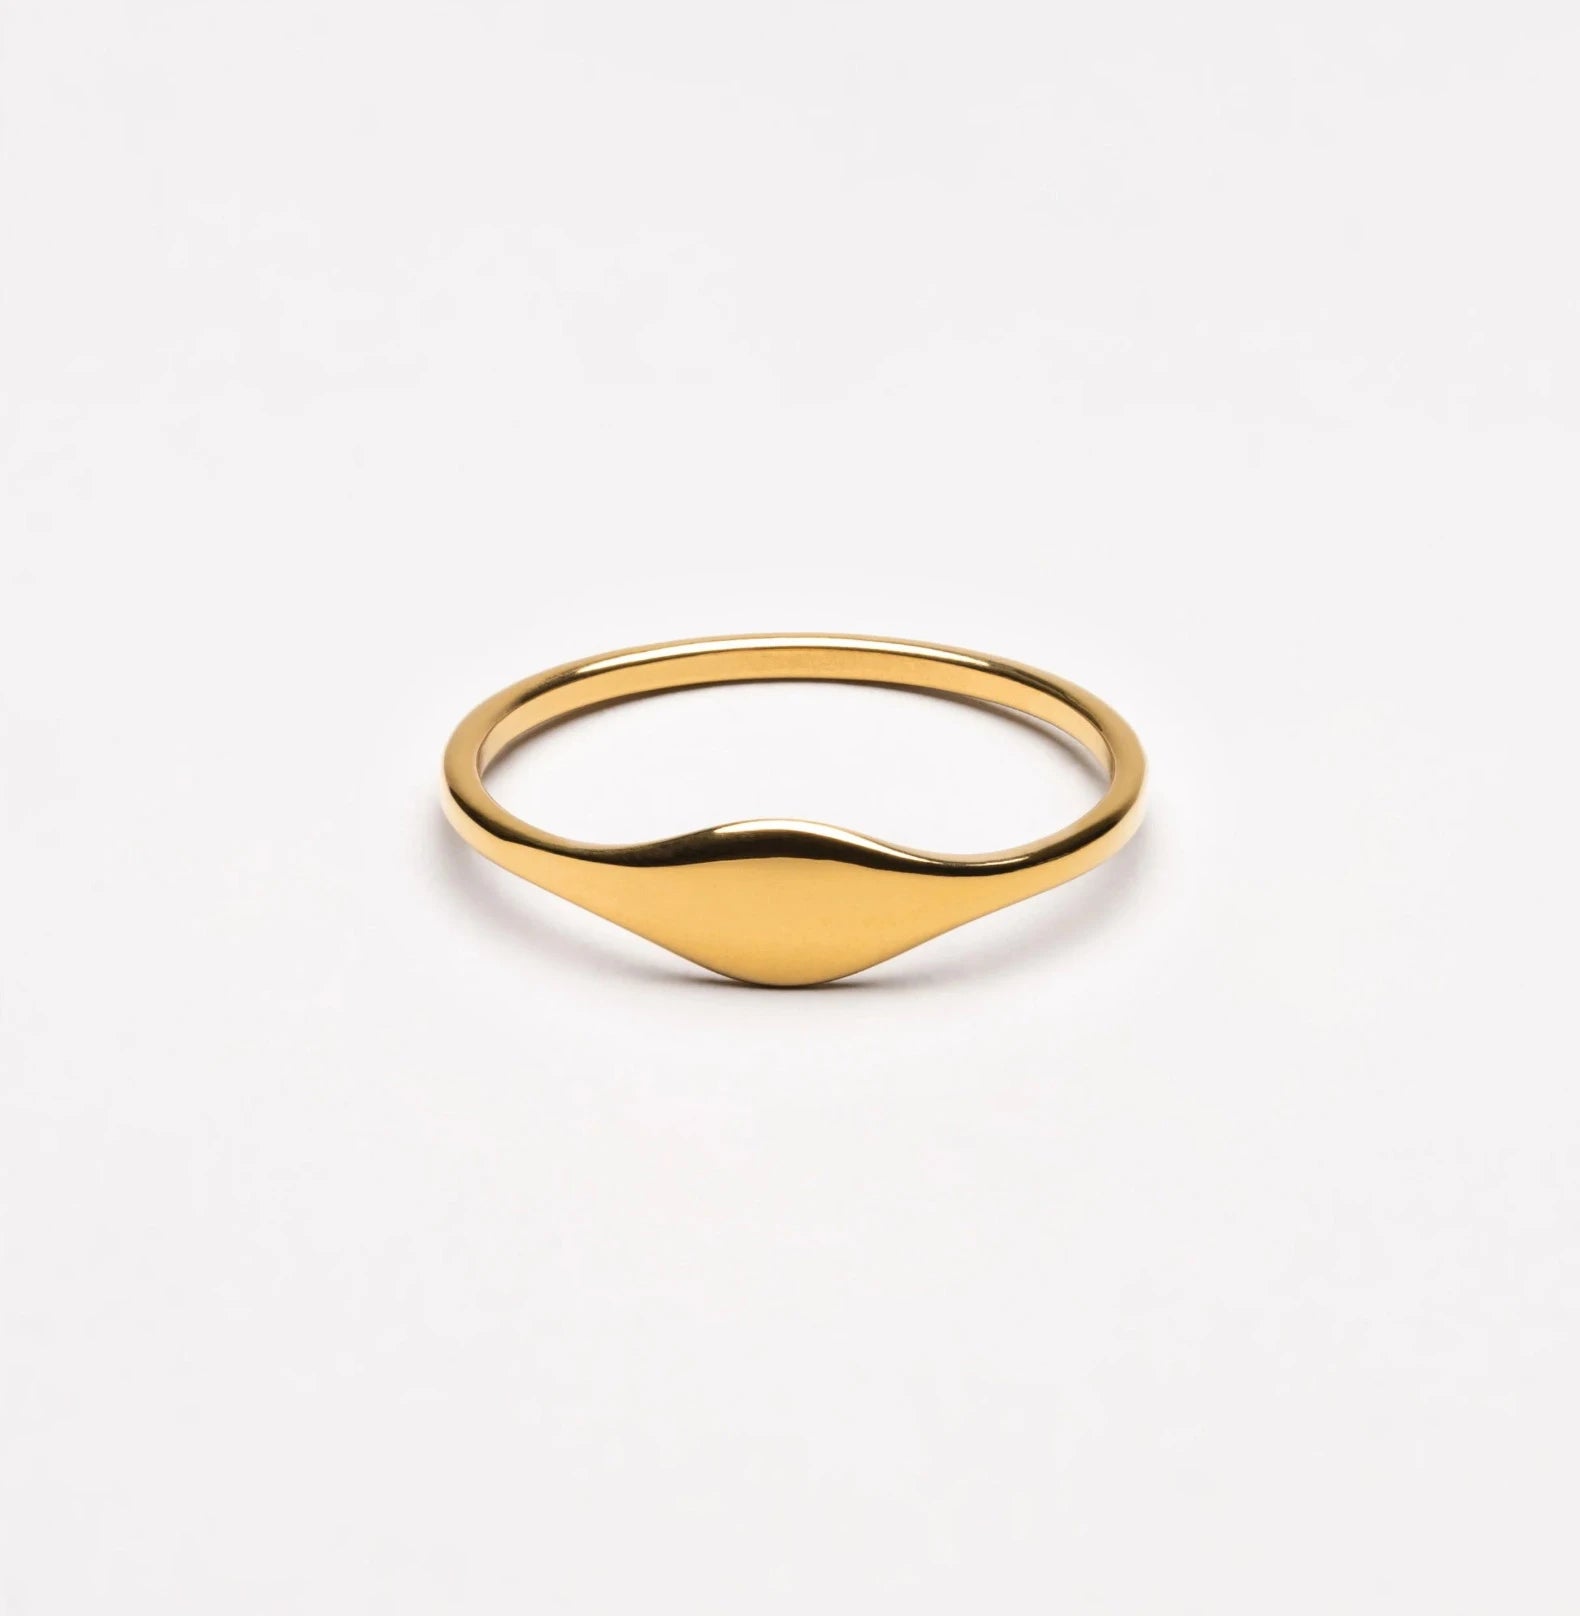 GRACE CURVED RING ring Yubama Jewelry Online Store - The Elegant Designs of Gold and Silver ! 